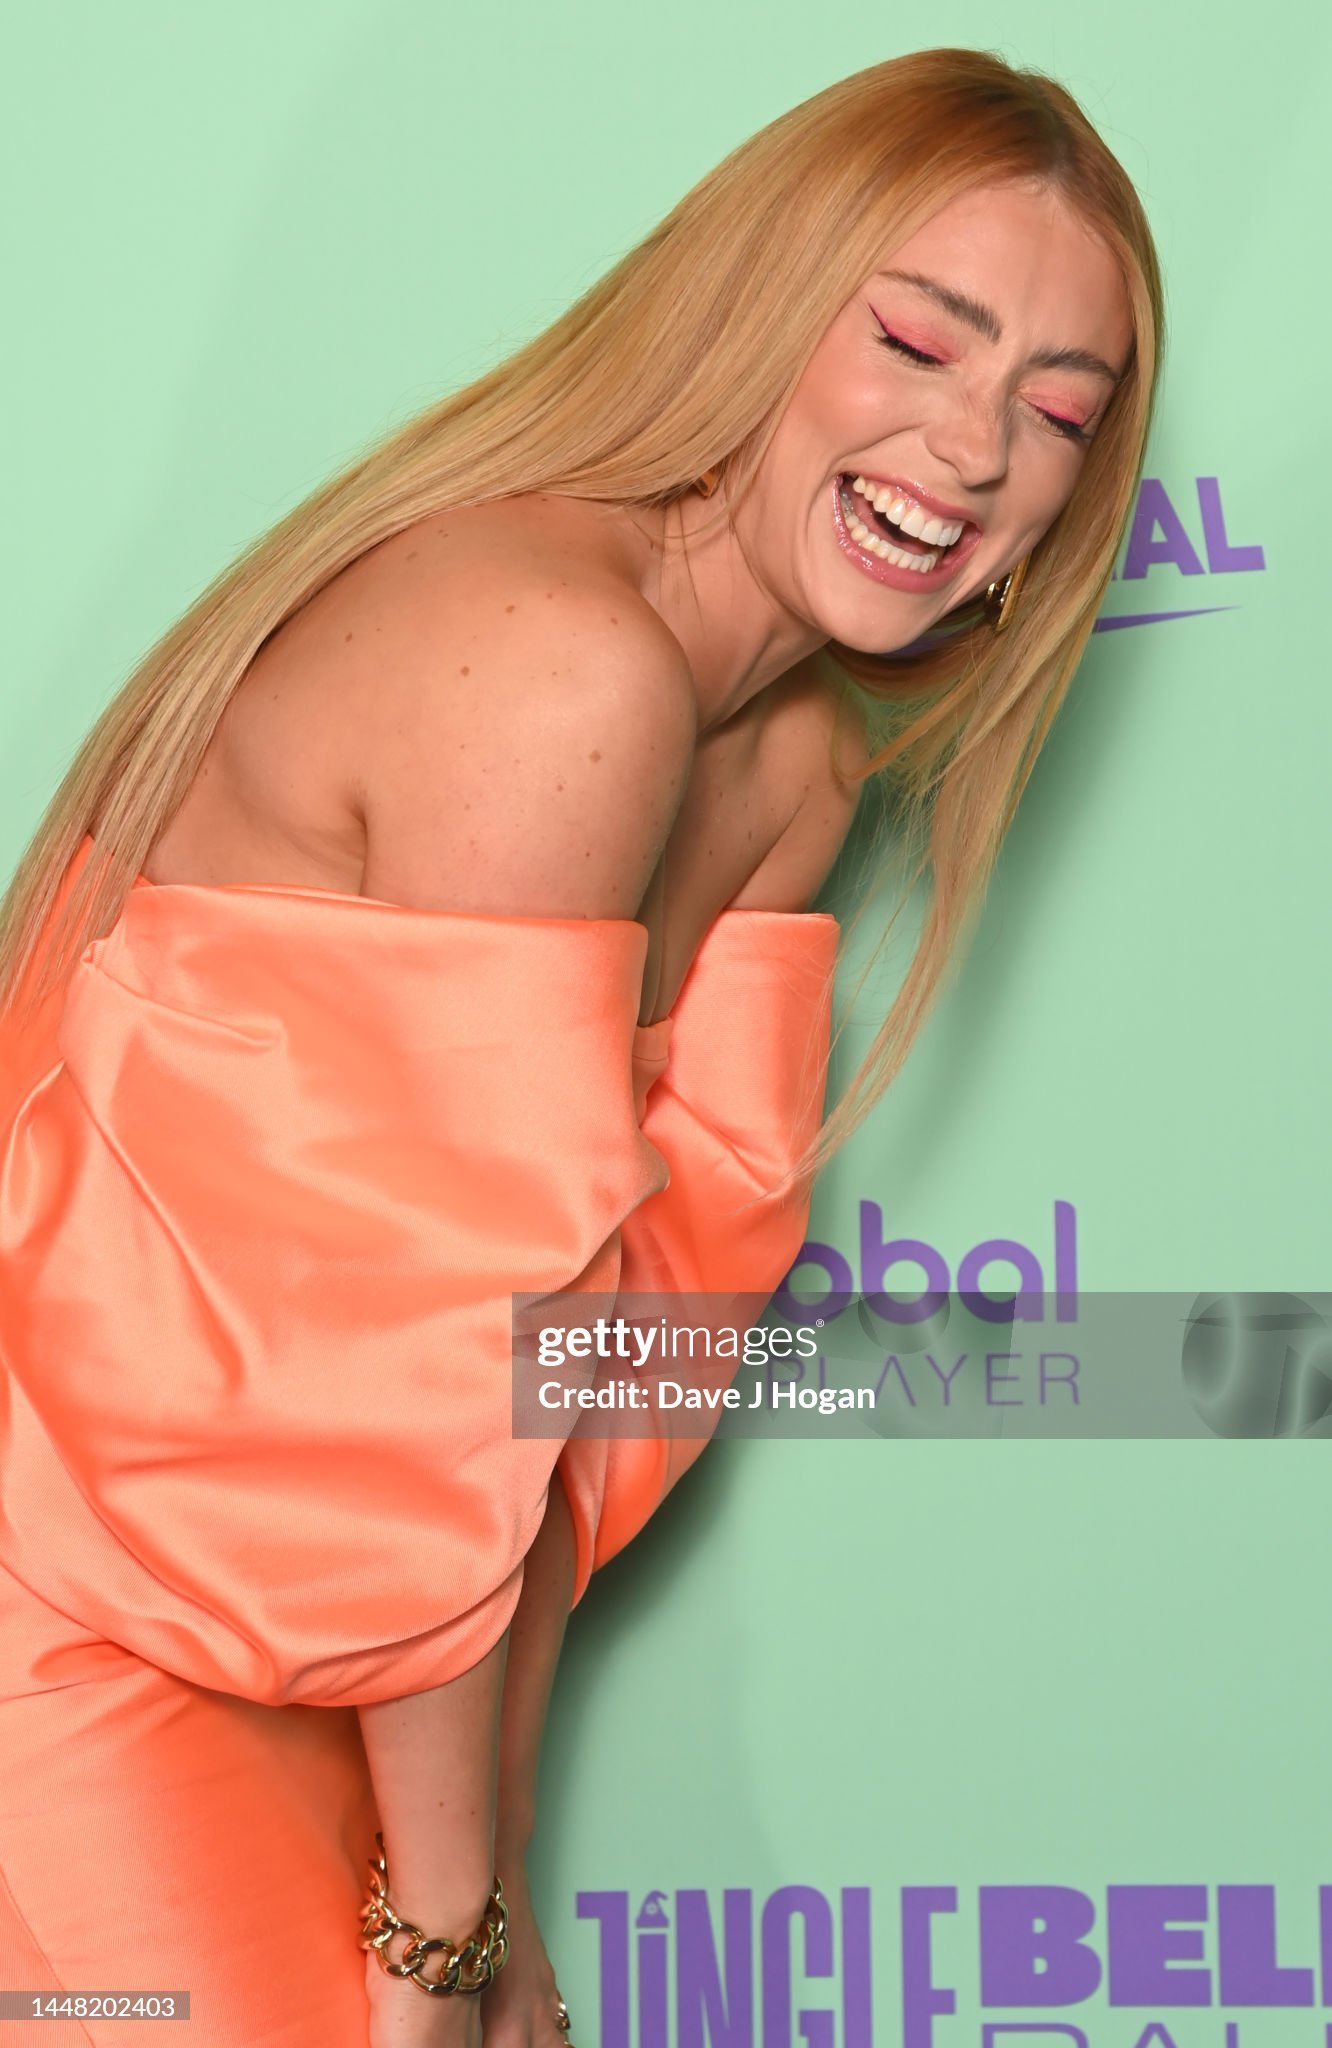 gettyimages-1448202403-2048x2048.jpg